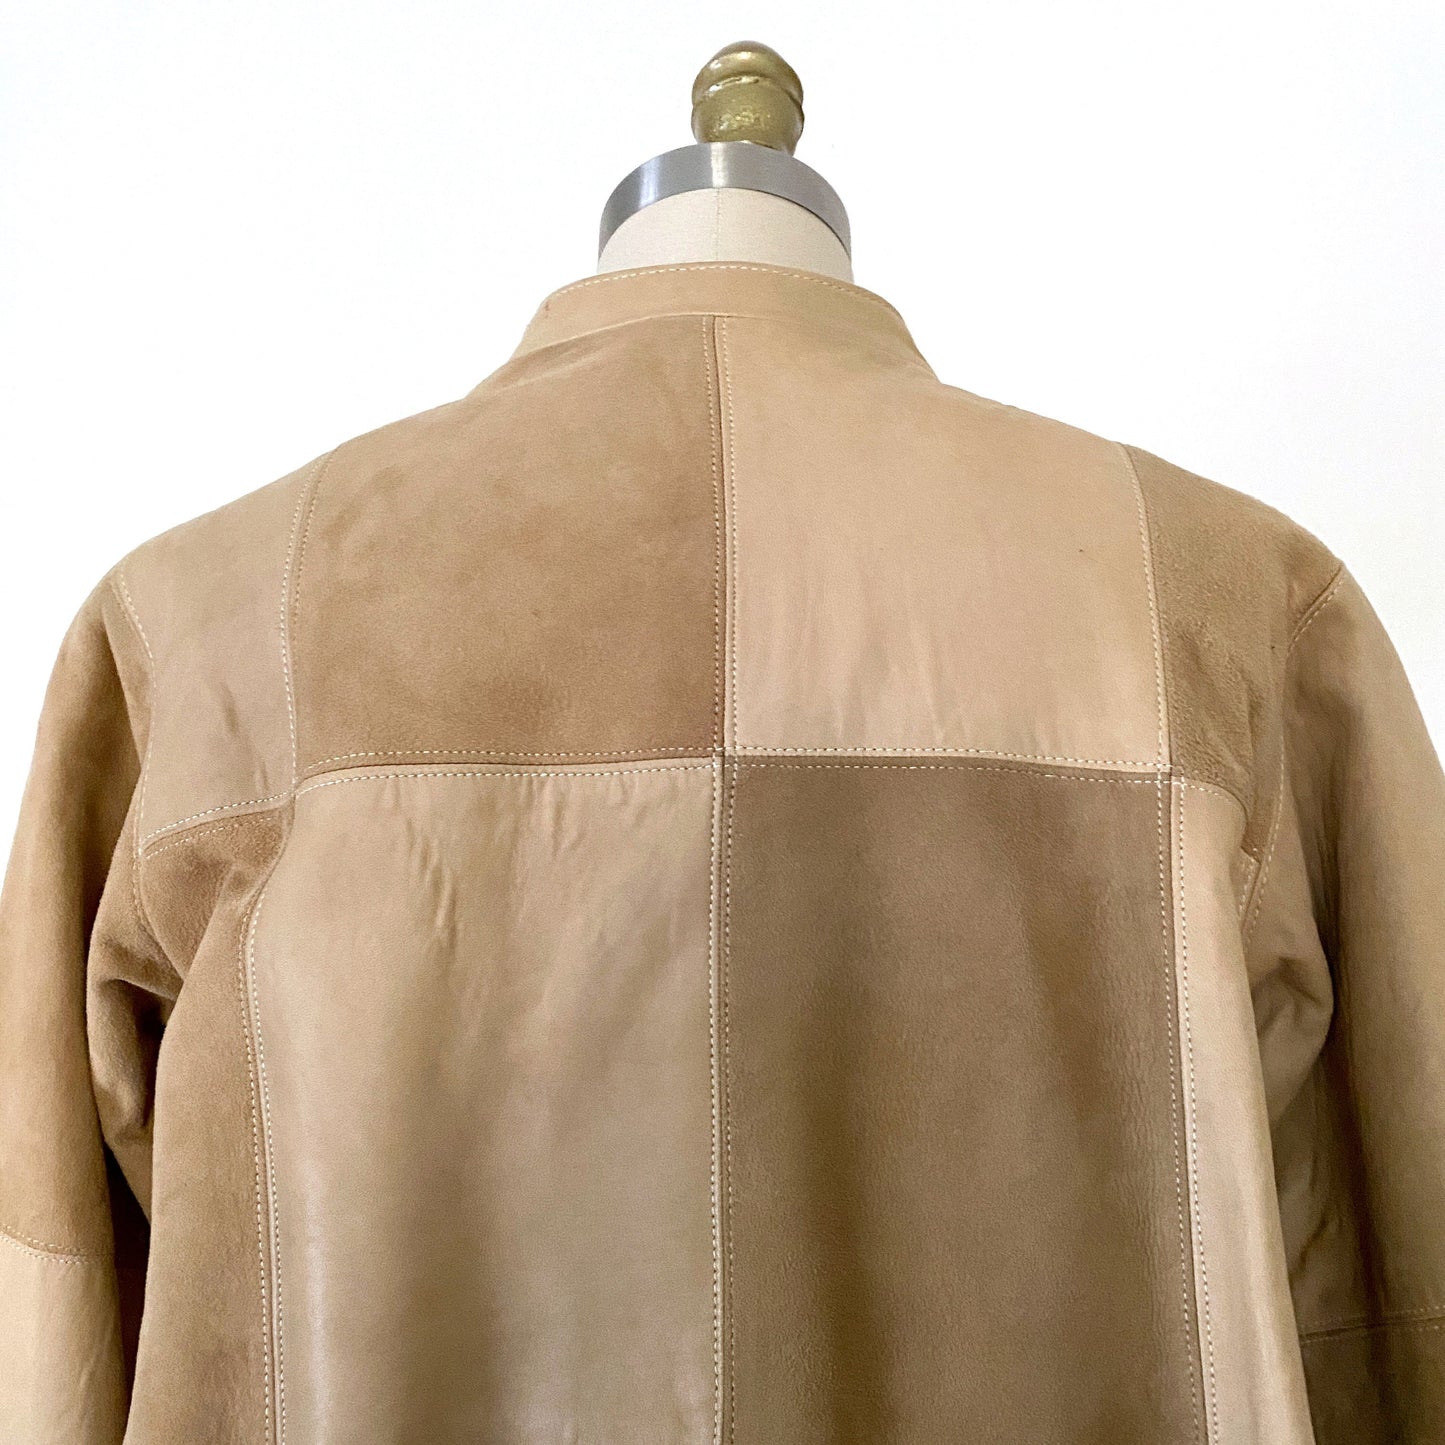 1970s Bonnie Cashin for Sills Suede and Leather Patchwork Balloon Coat Mint Condition